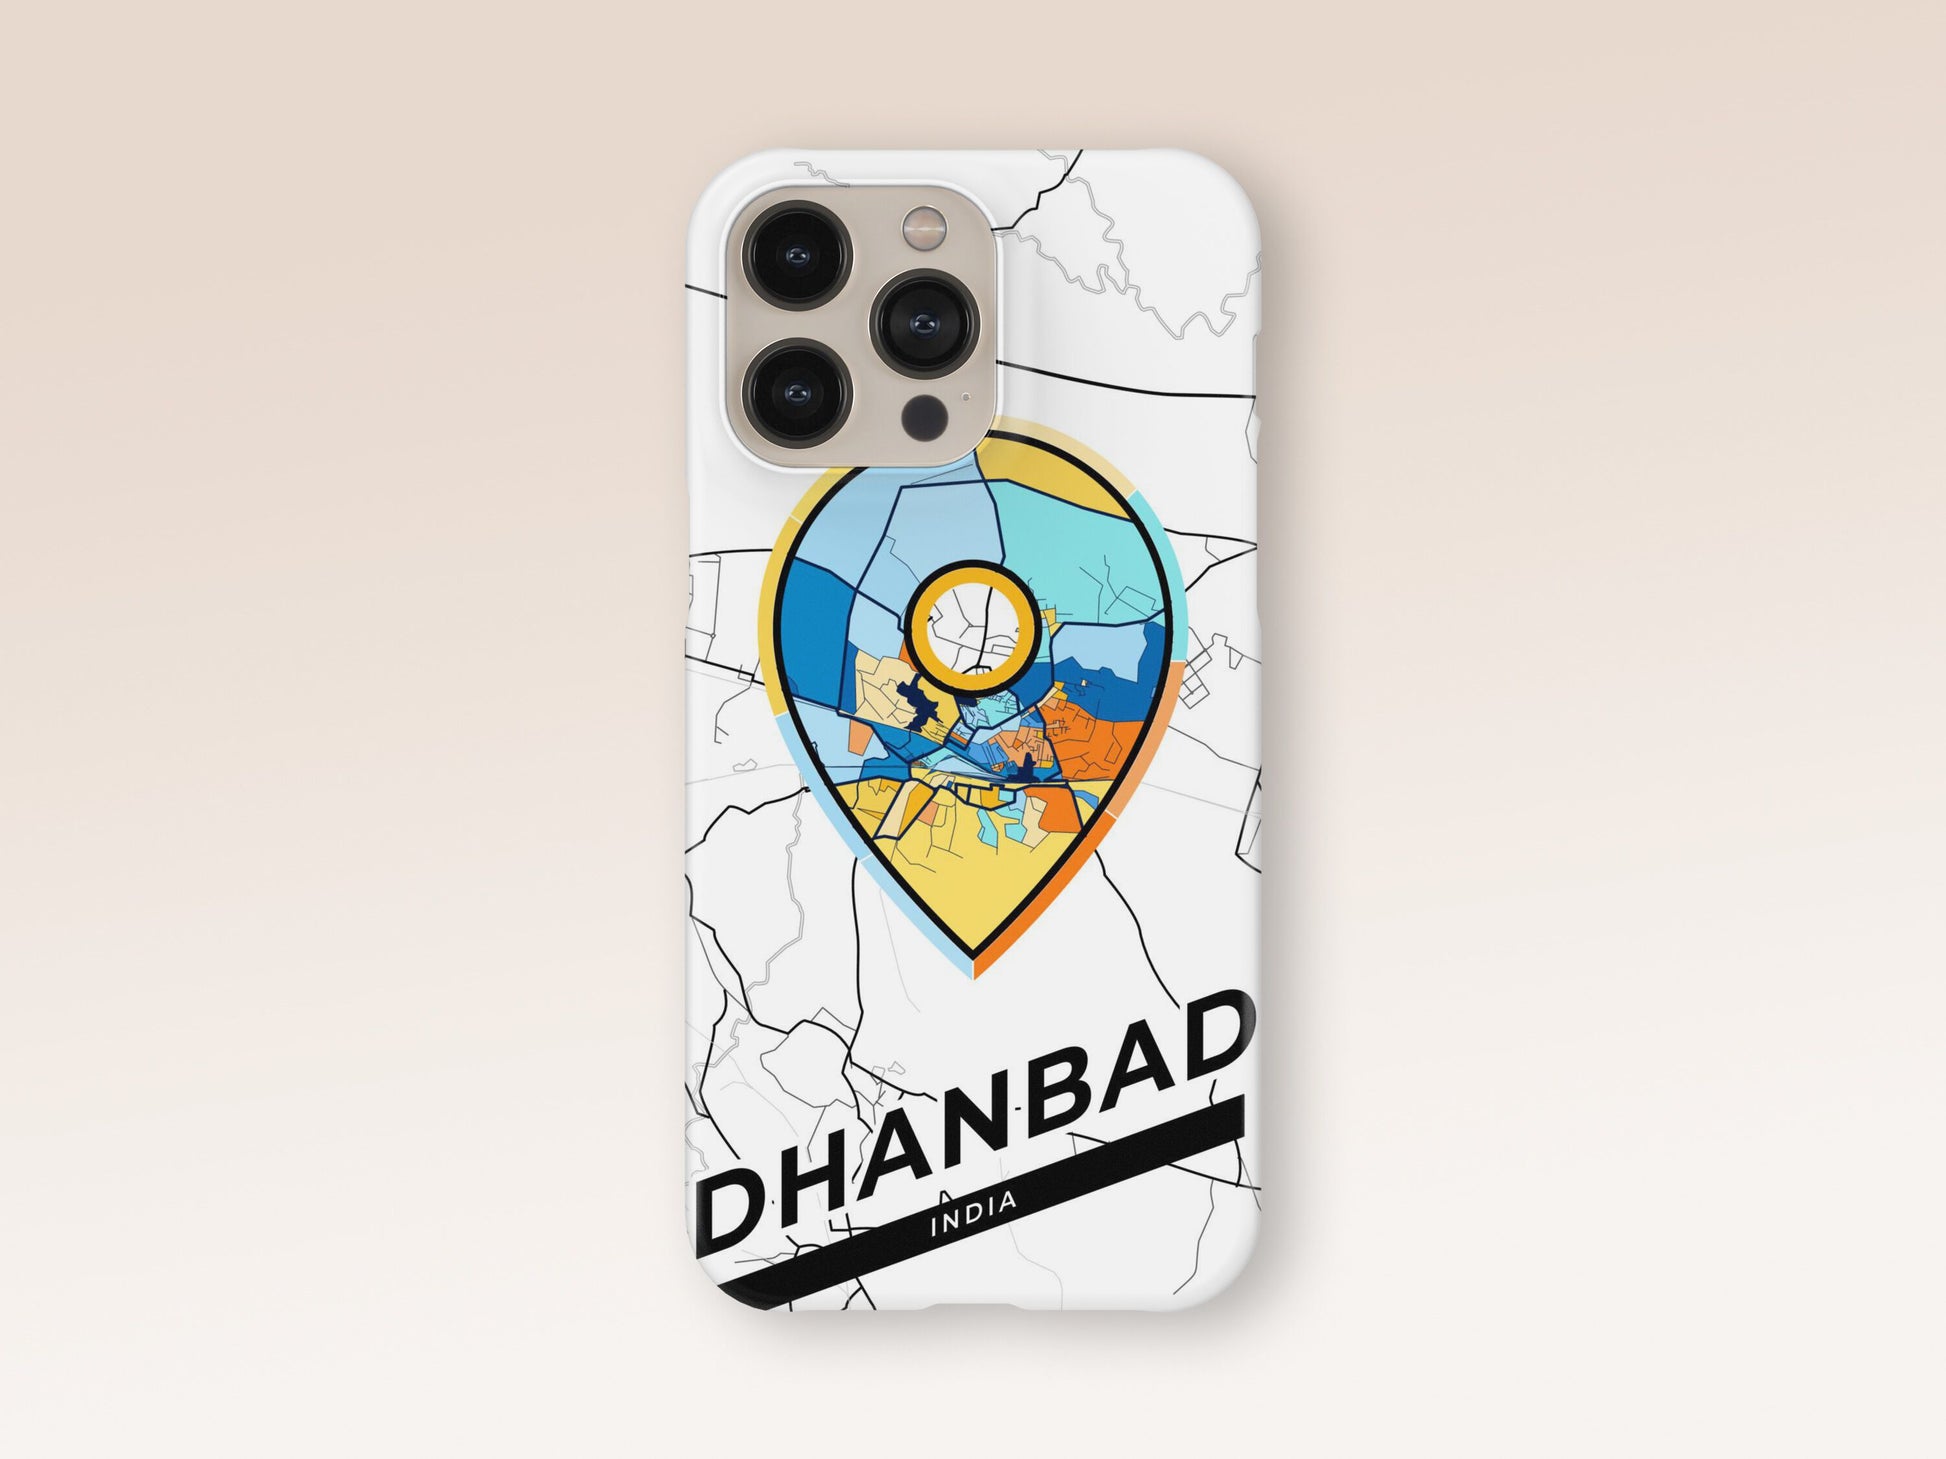 Dhanbad India slim phone case with colorful icon. Birthday, wedding or housewarming gift. Couple match cases. 1